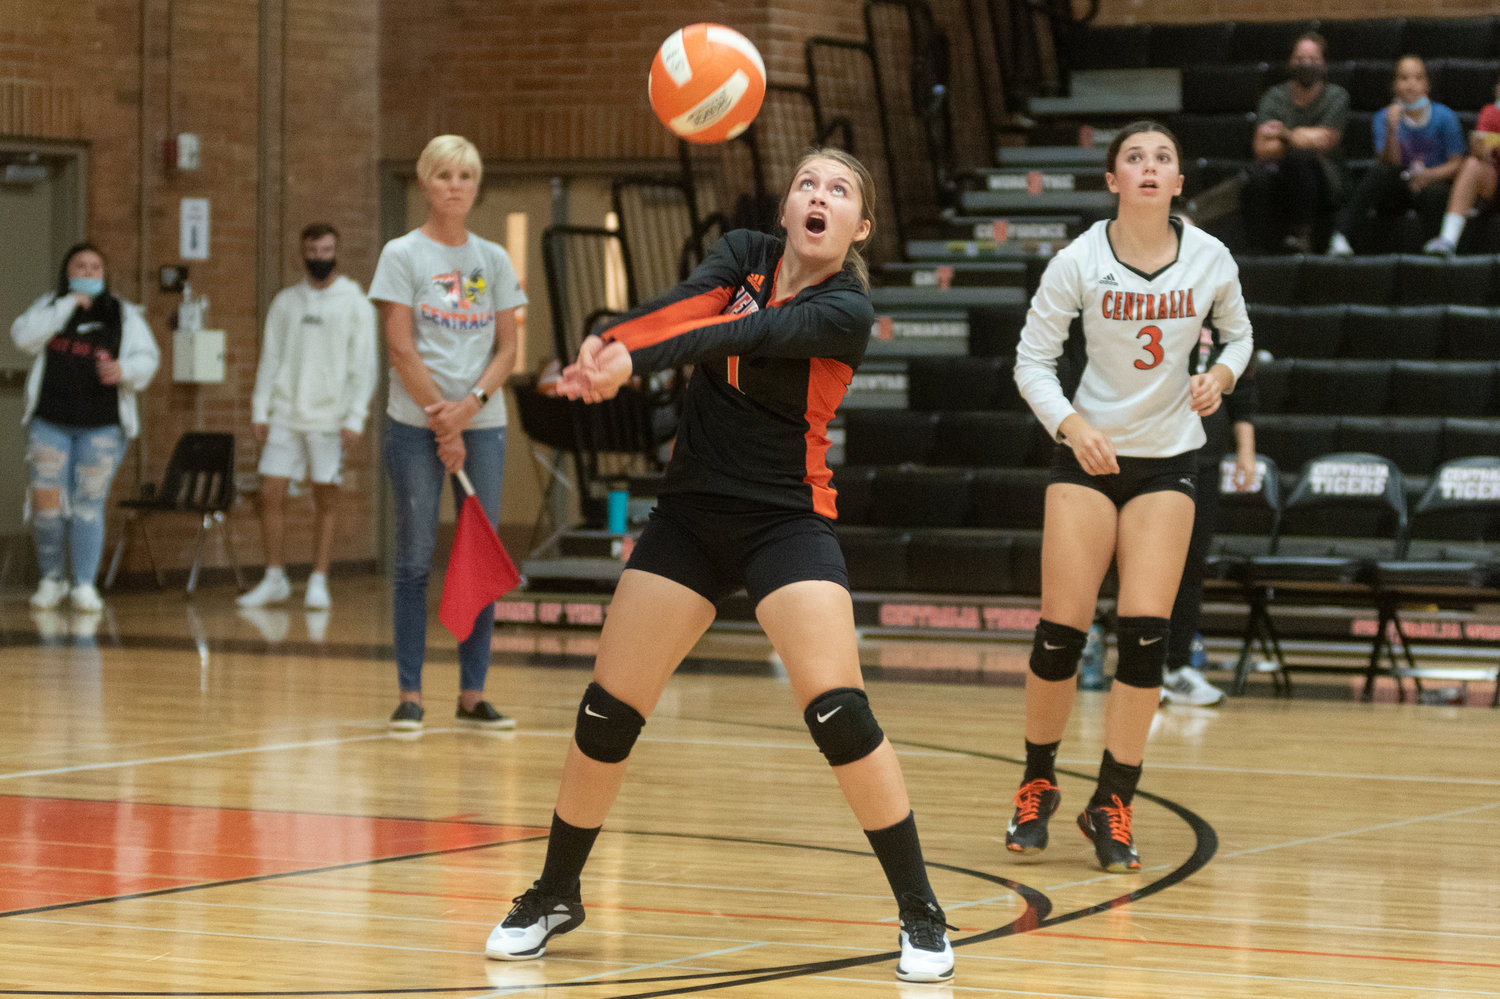 Centralia libero Evie Rooklidge digs the ball in the Tigers loss to Black Hills Tuesday night.